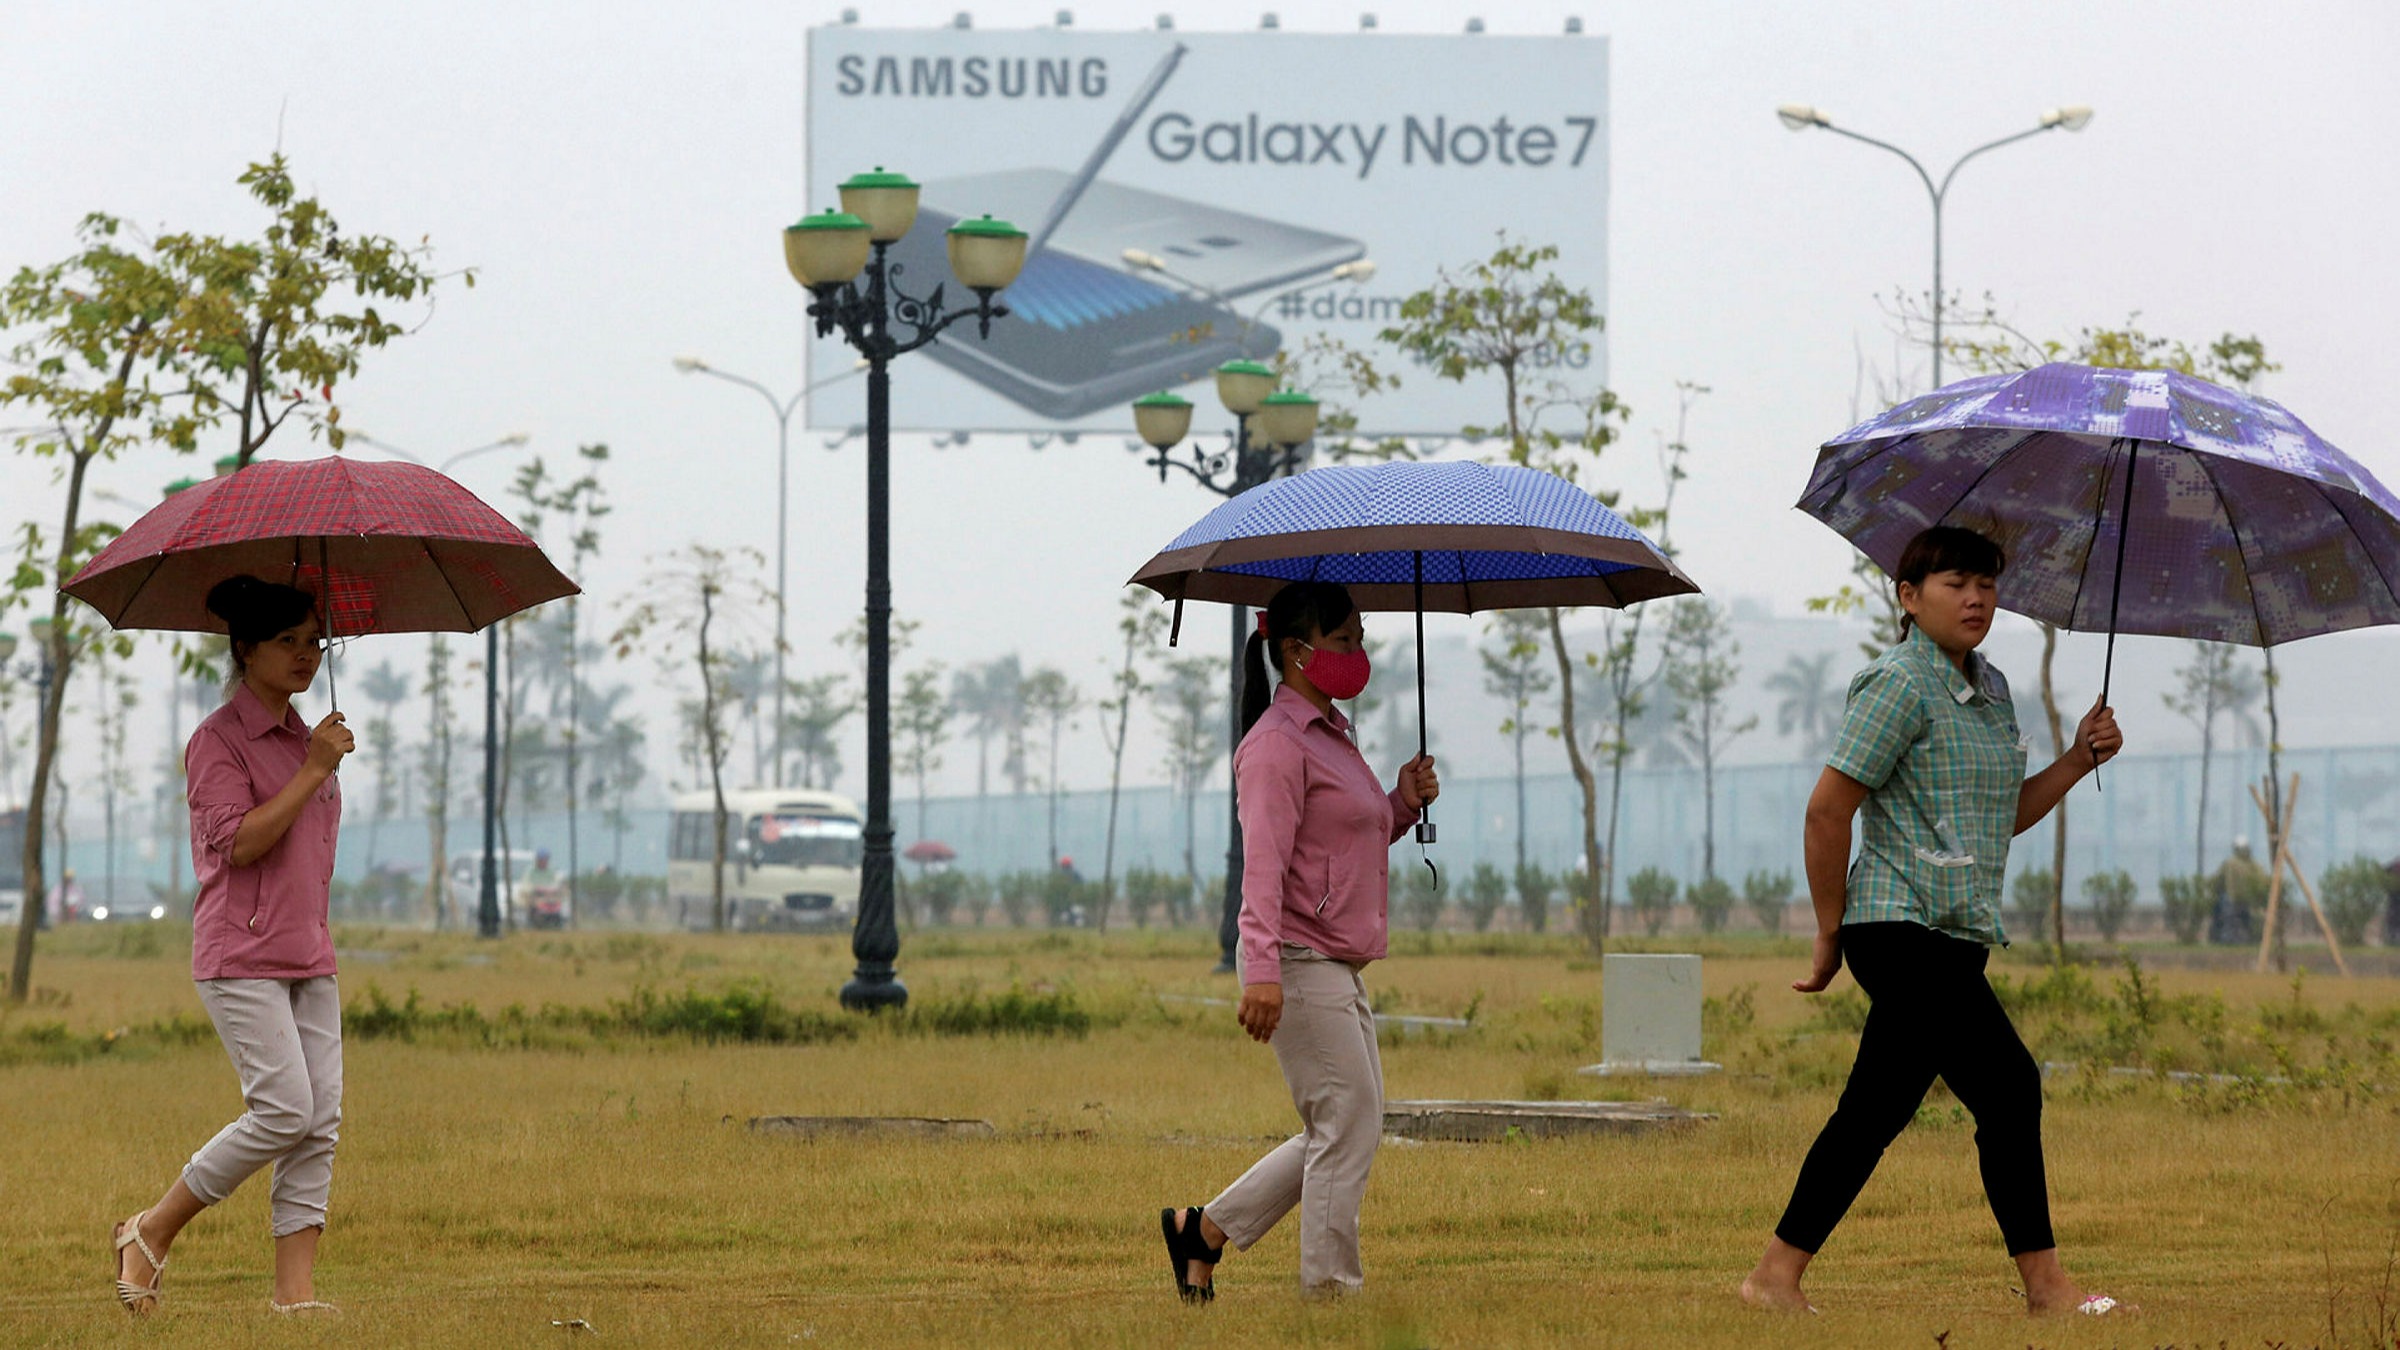 Samsung's reliance on fossil fuels poses growing risk to investors